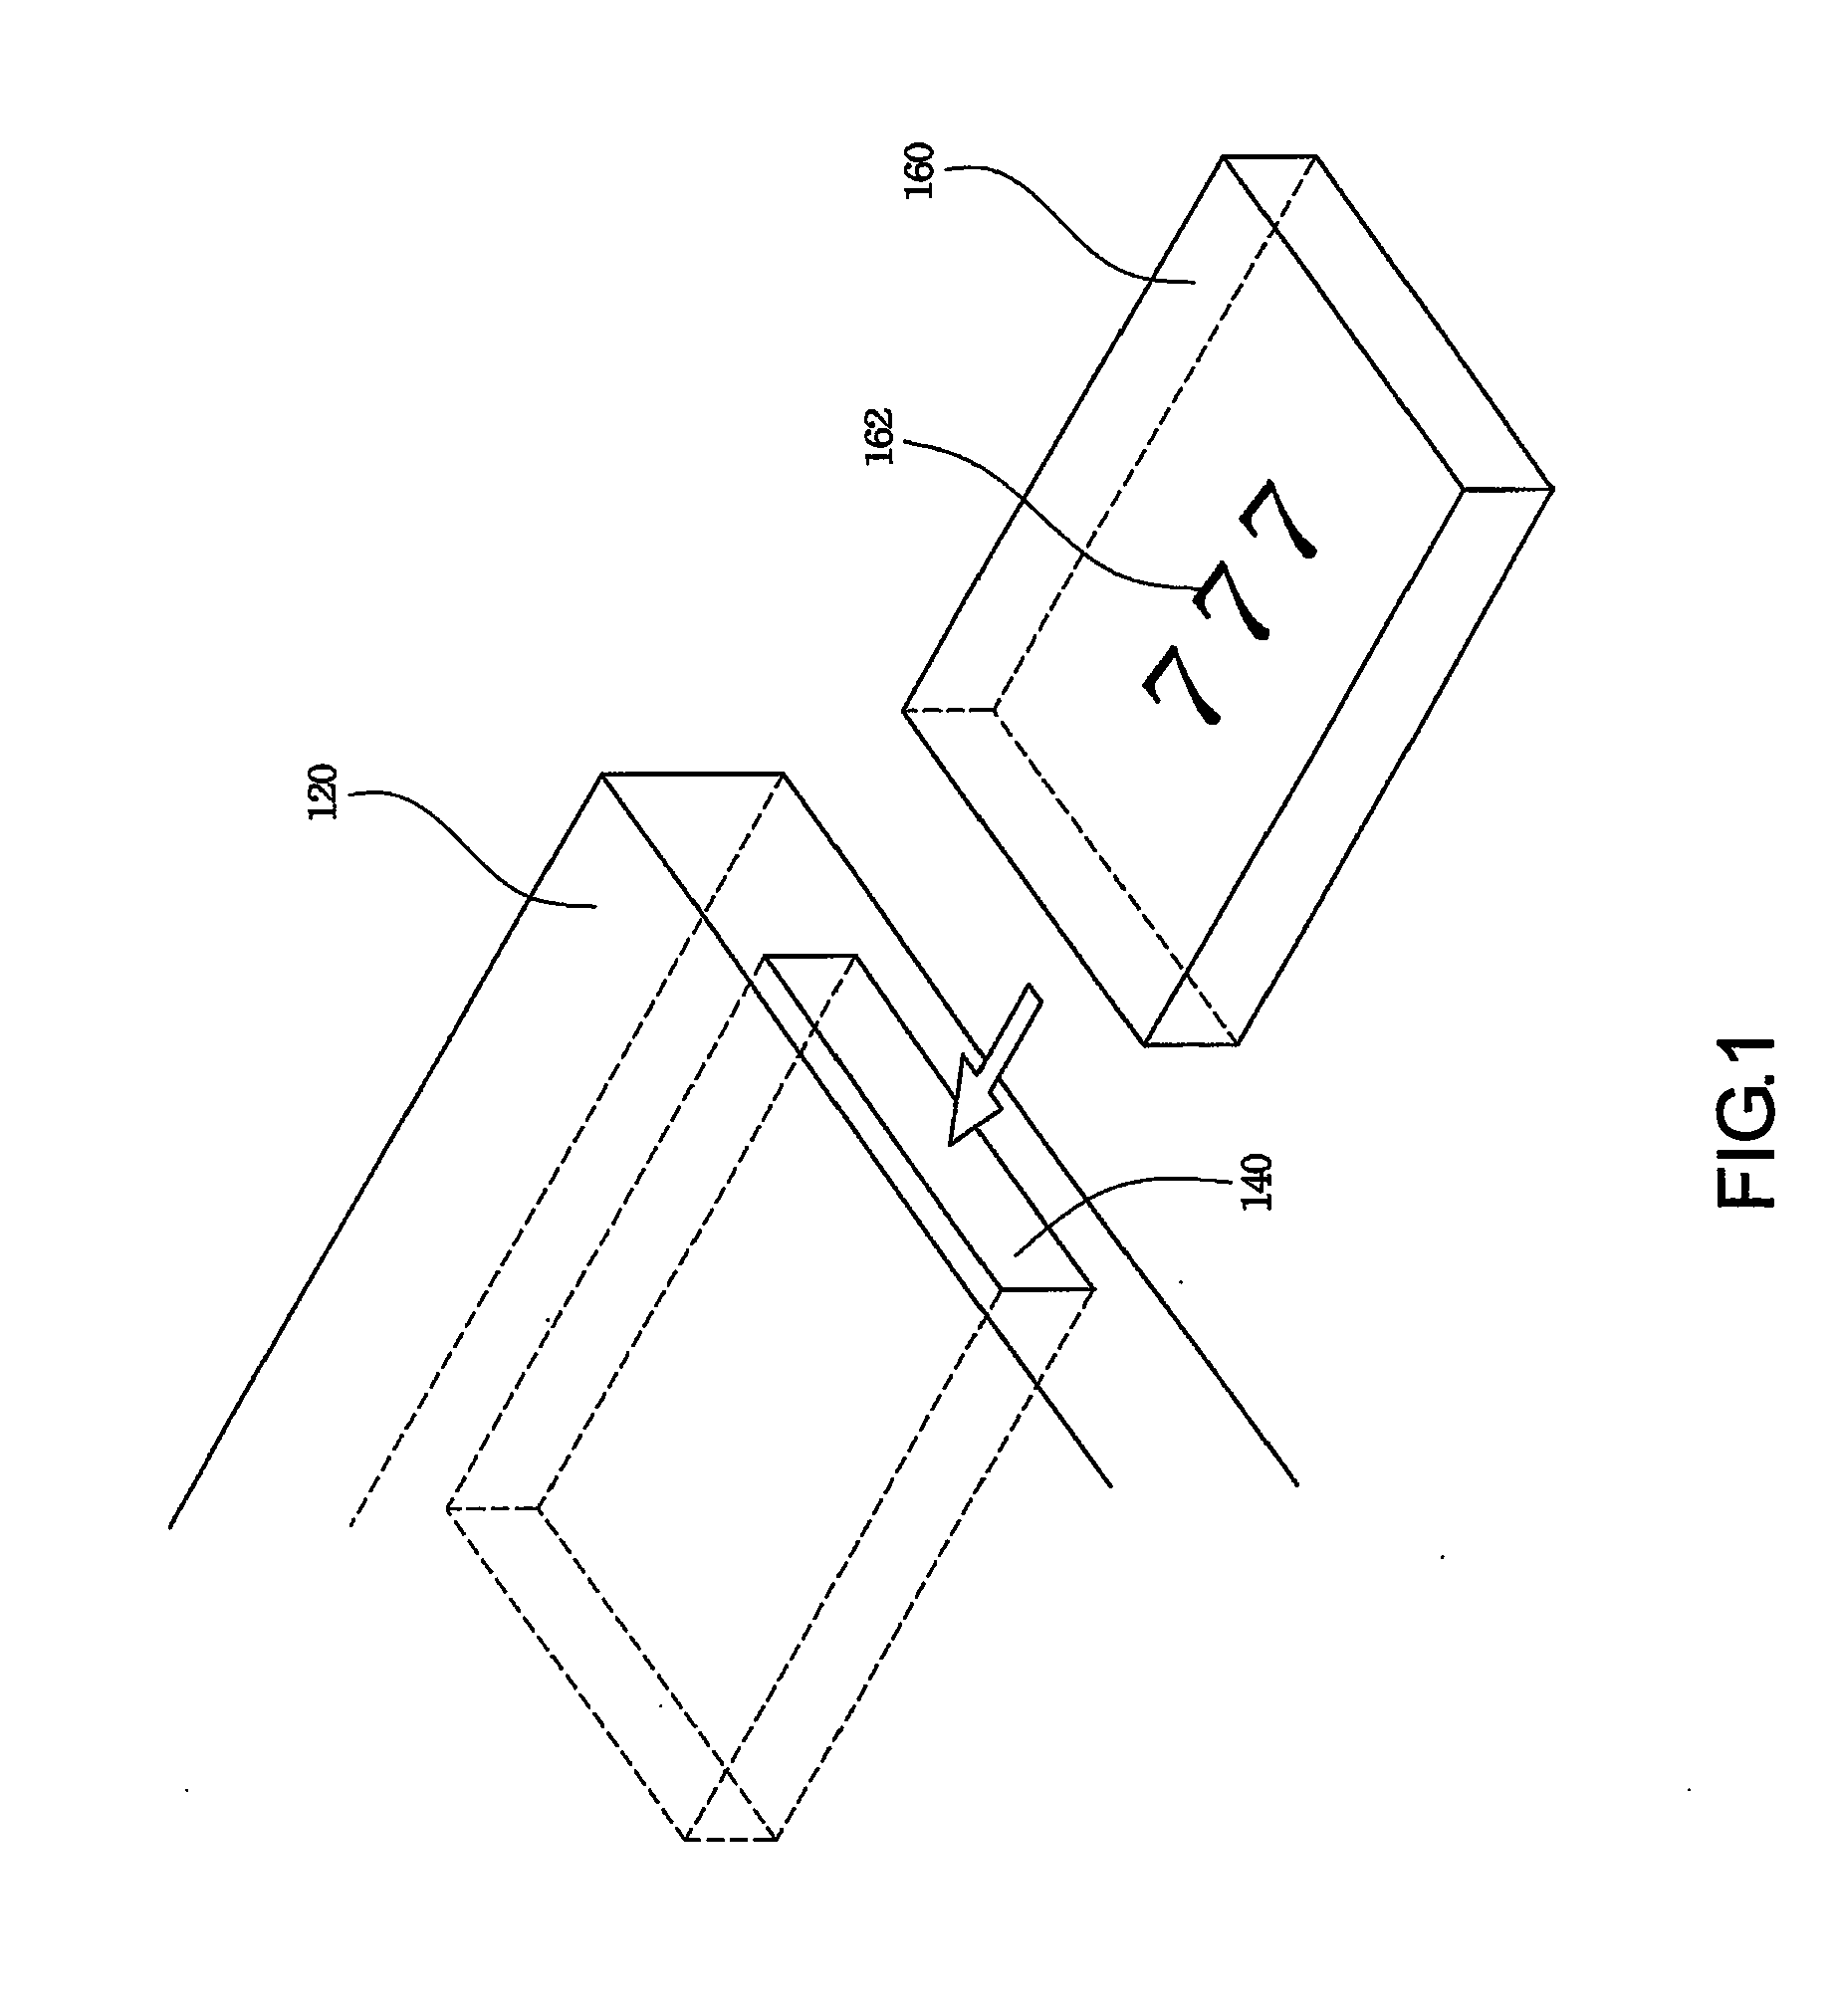 Touch screen display device and application thereof